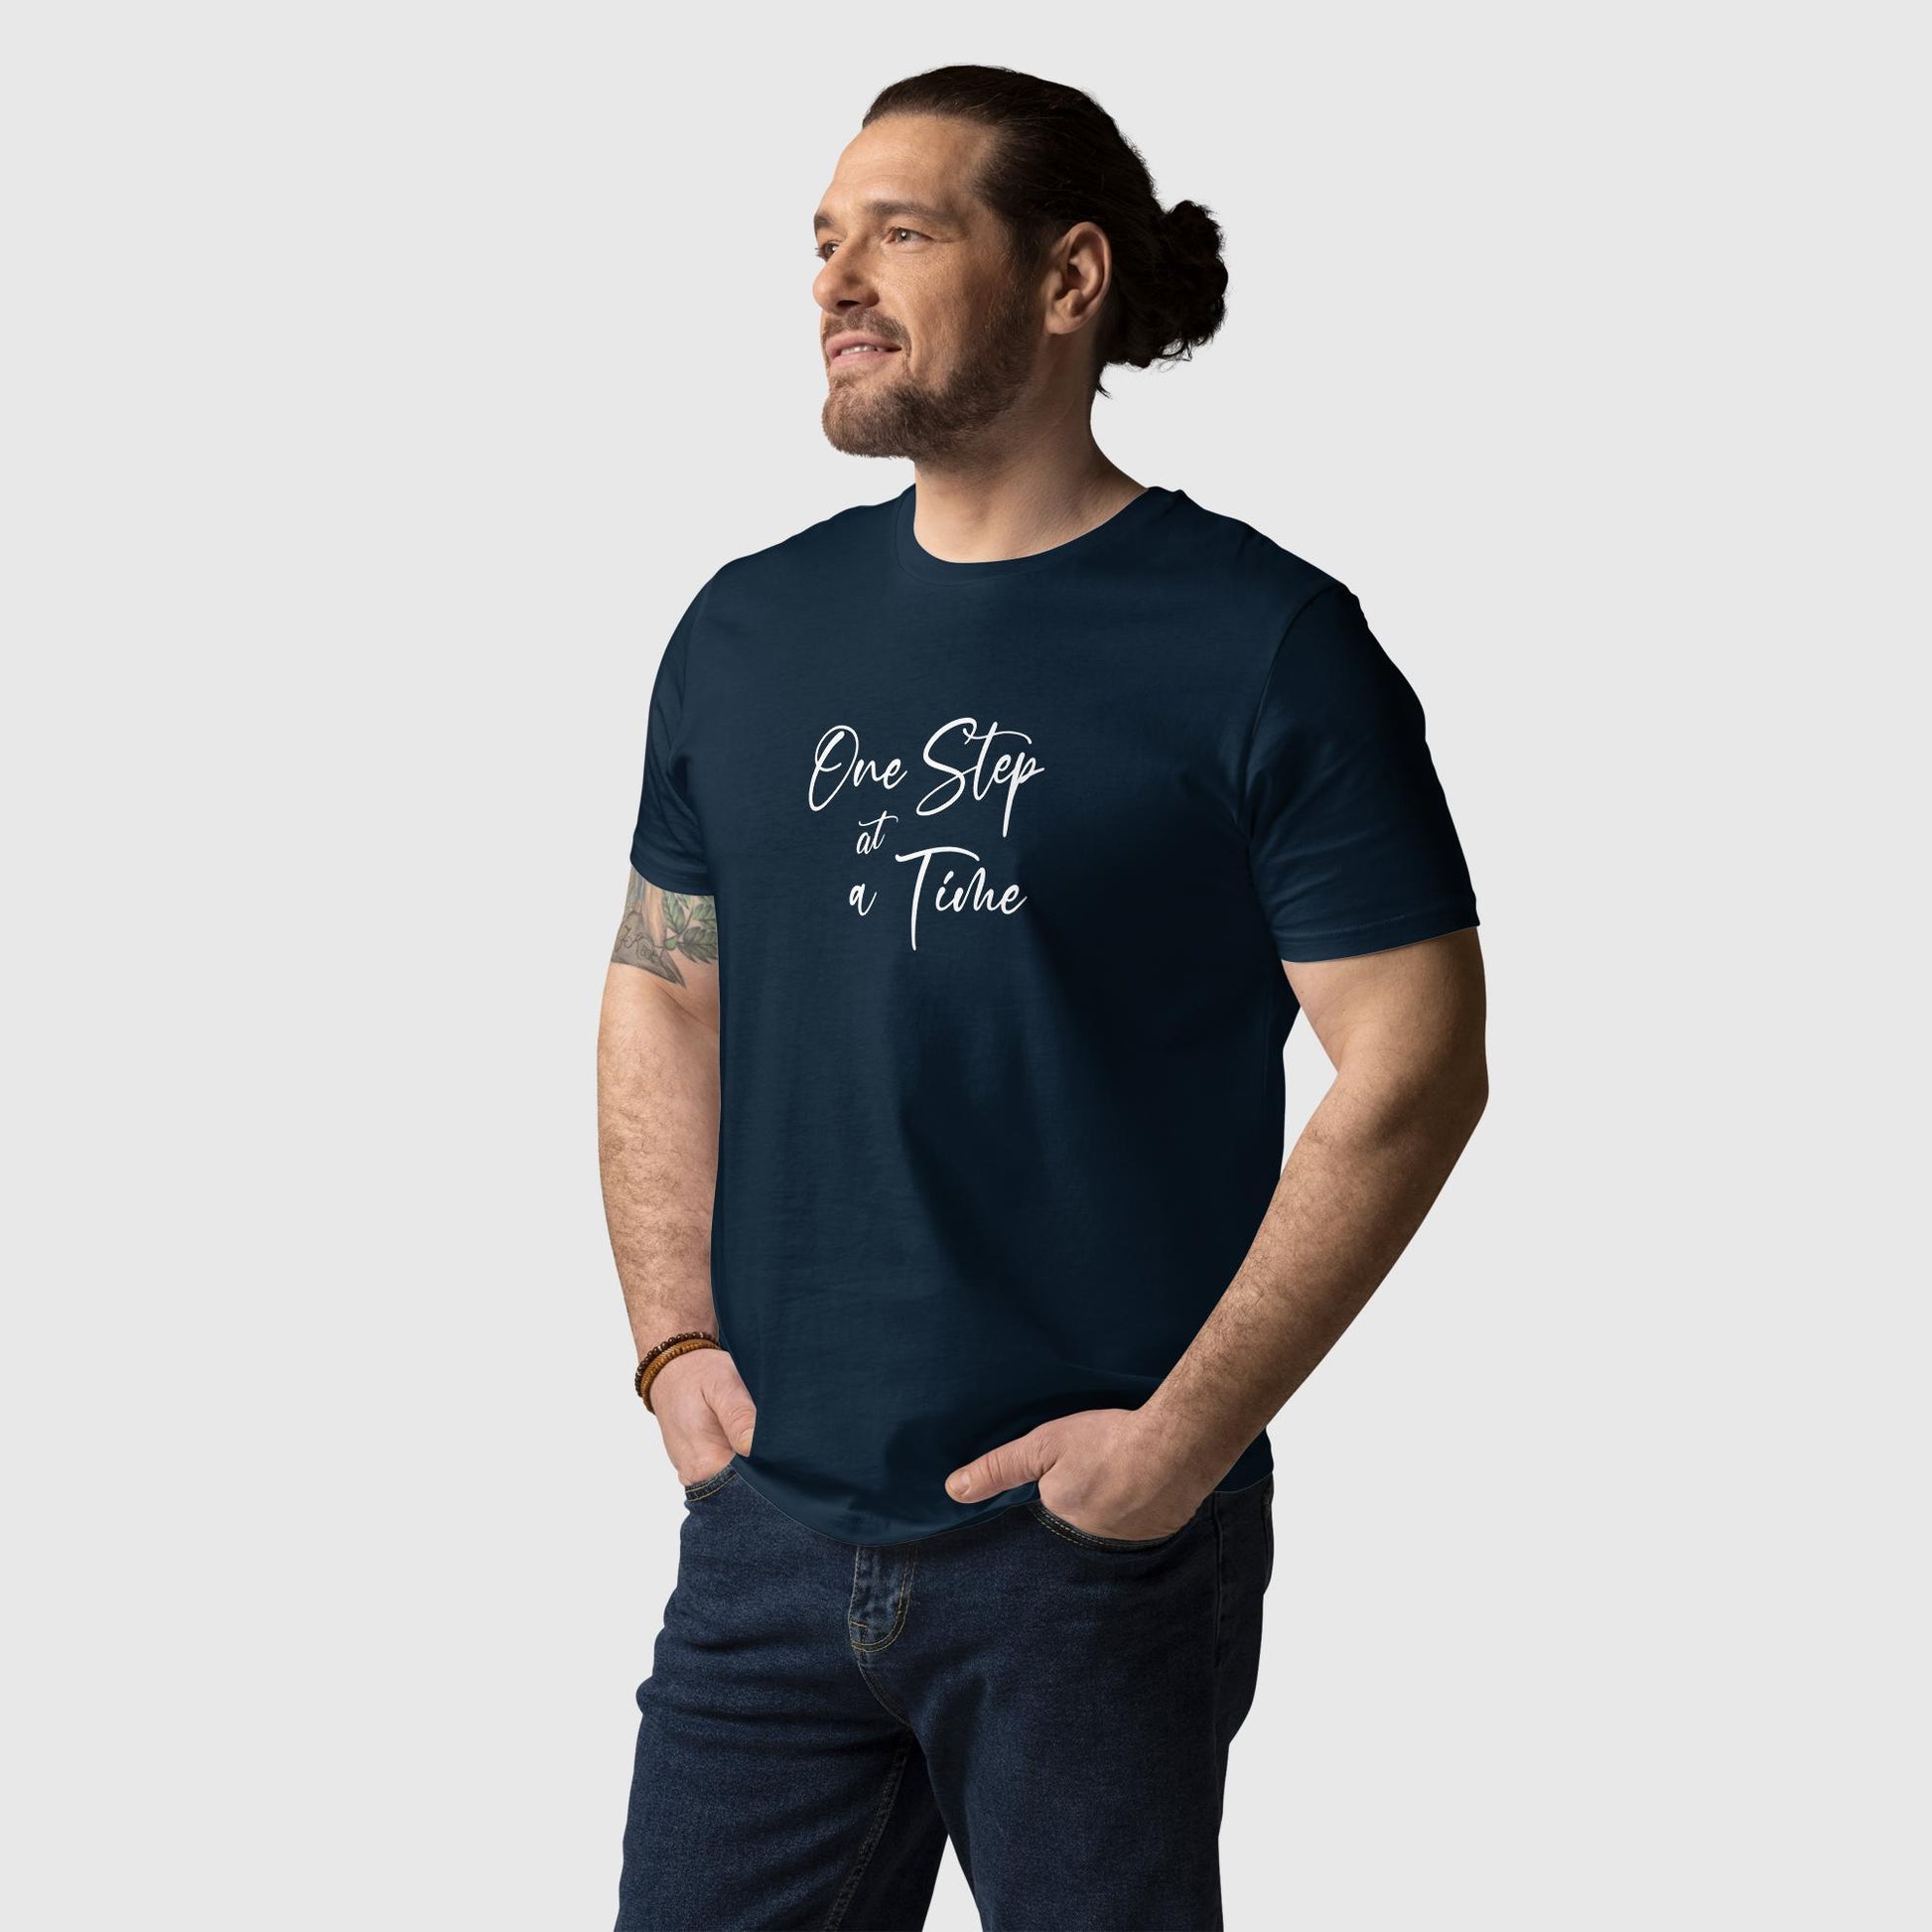 Men's french navy organic cotton t-shirt that features the positive saying, "One Step At A Time."